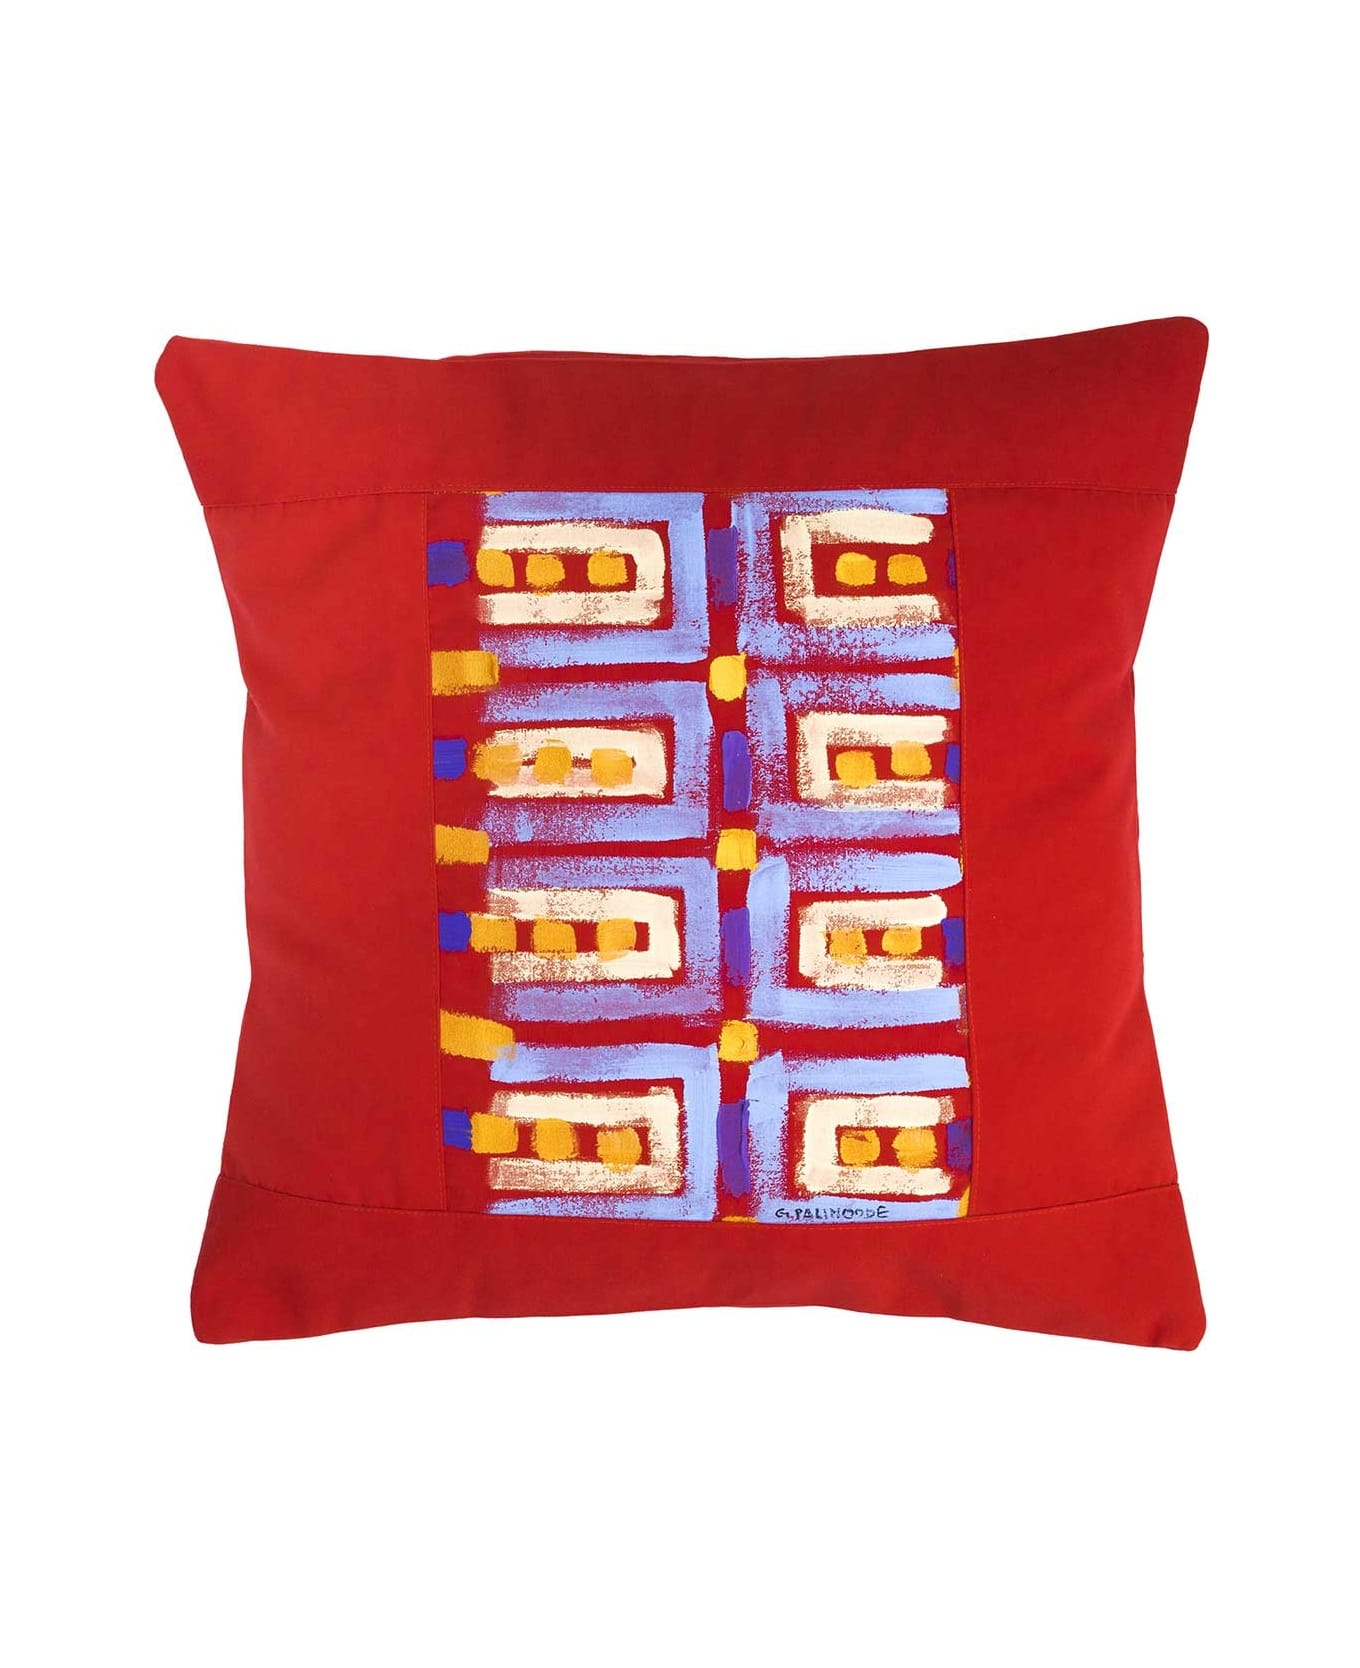 Le Botteghe su Gologone Acrylic Hand Painted Outdoor Cushion 40x40 cm - Red Fantasy クッション